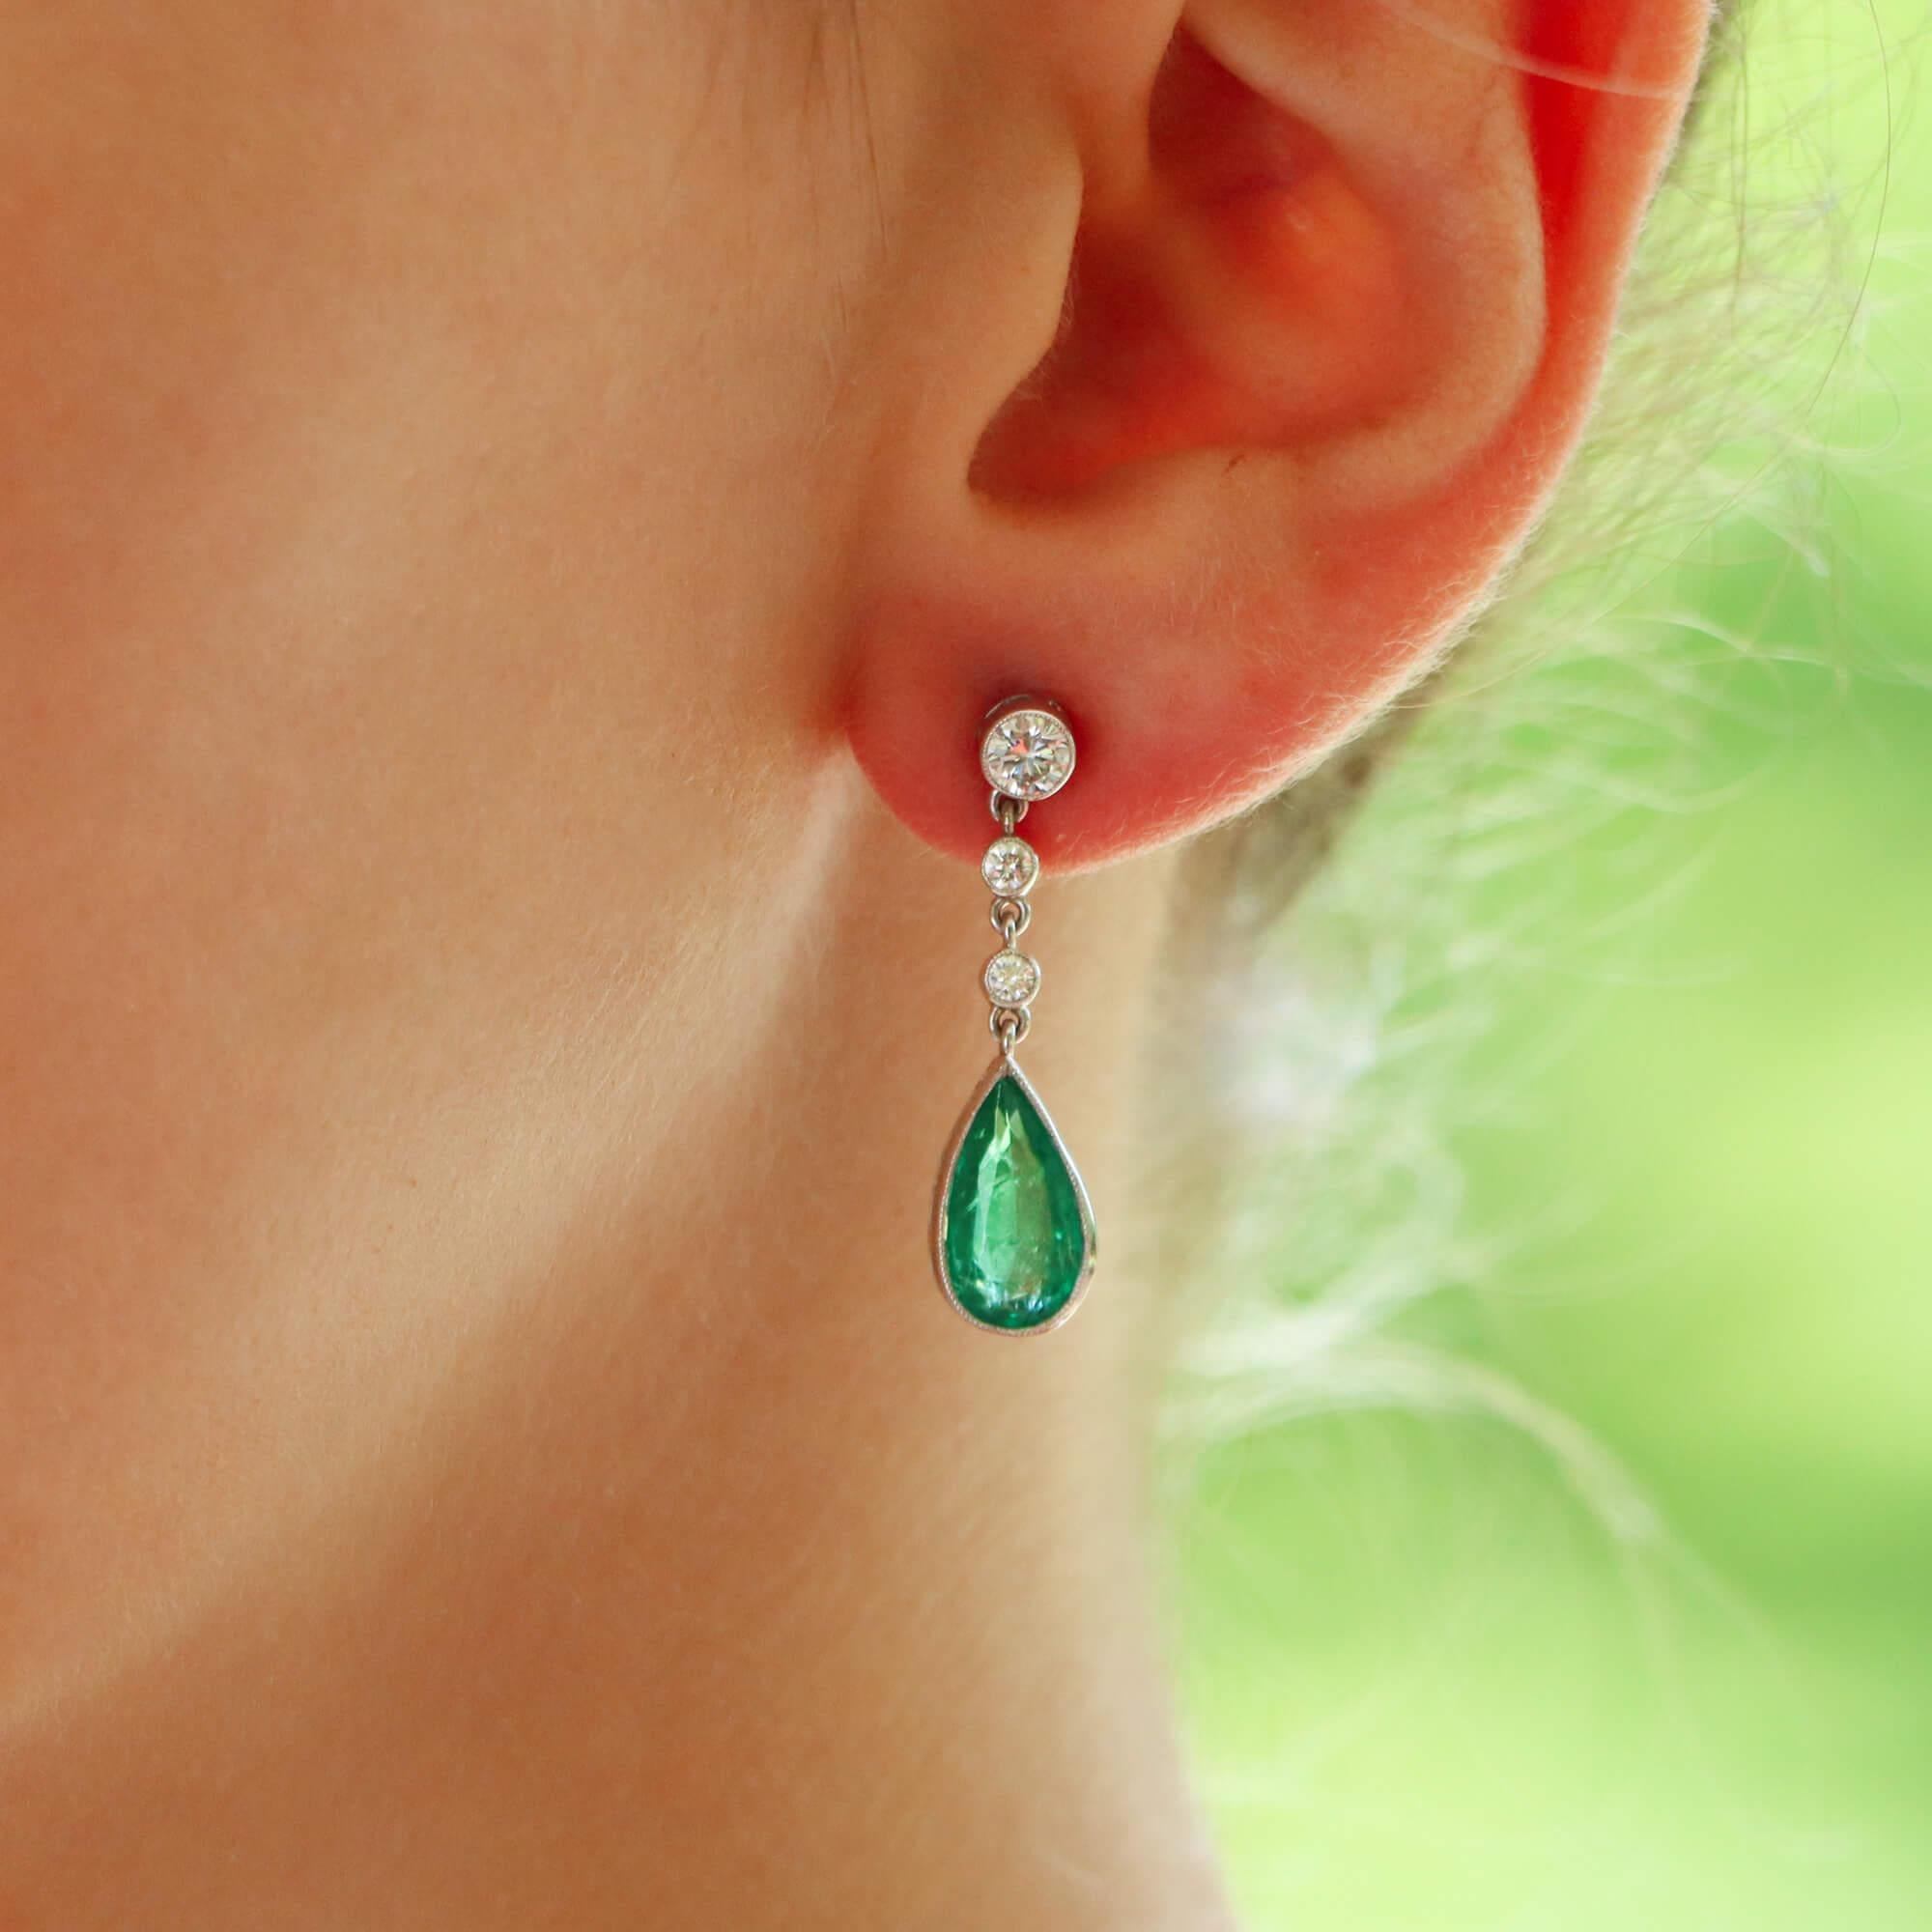 Modern Contemporary Pear Cut Emerald and Diamond Drop Earrings Set in 18k White Gold